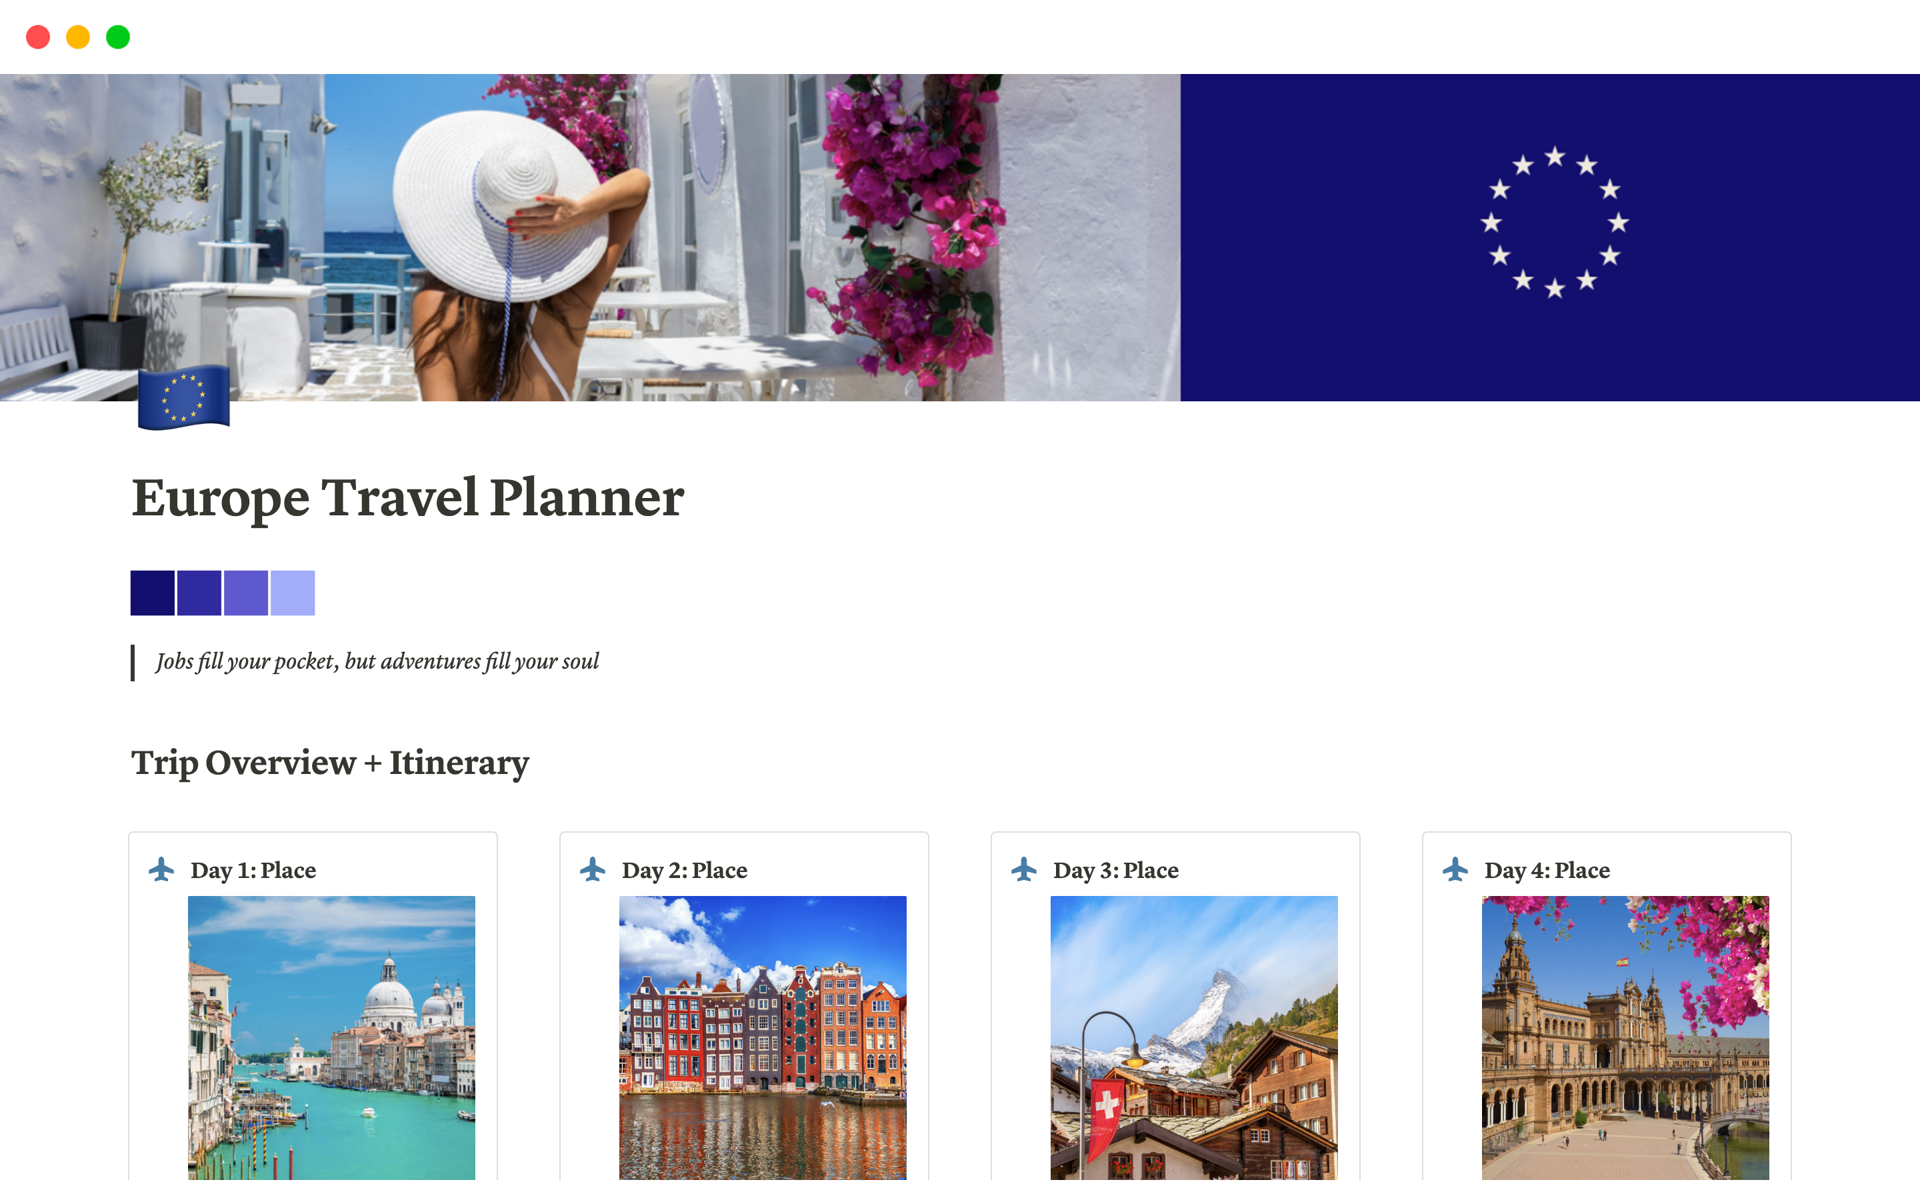 Features Include: Trip Overview + Itinerary, Emergency Contacts, Calendar, Packing List, Recreation (Activities and Attractions, Restaurants and Dining, Meet Ups, Local Language, Shopping), Budget + Expense, Accomodation Details, Eurail Planner Transportation Details